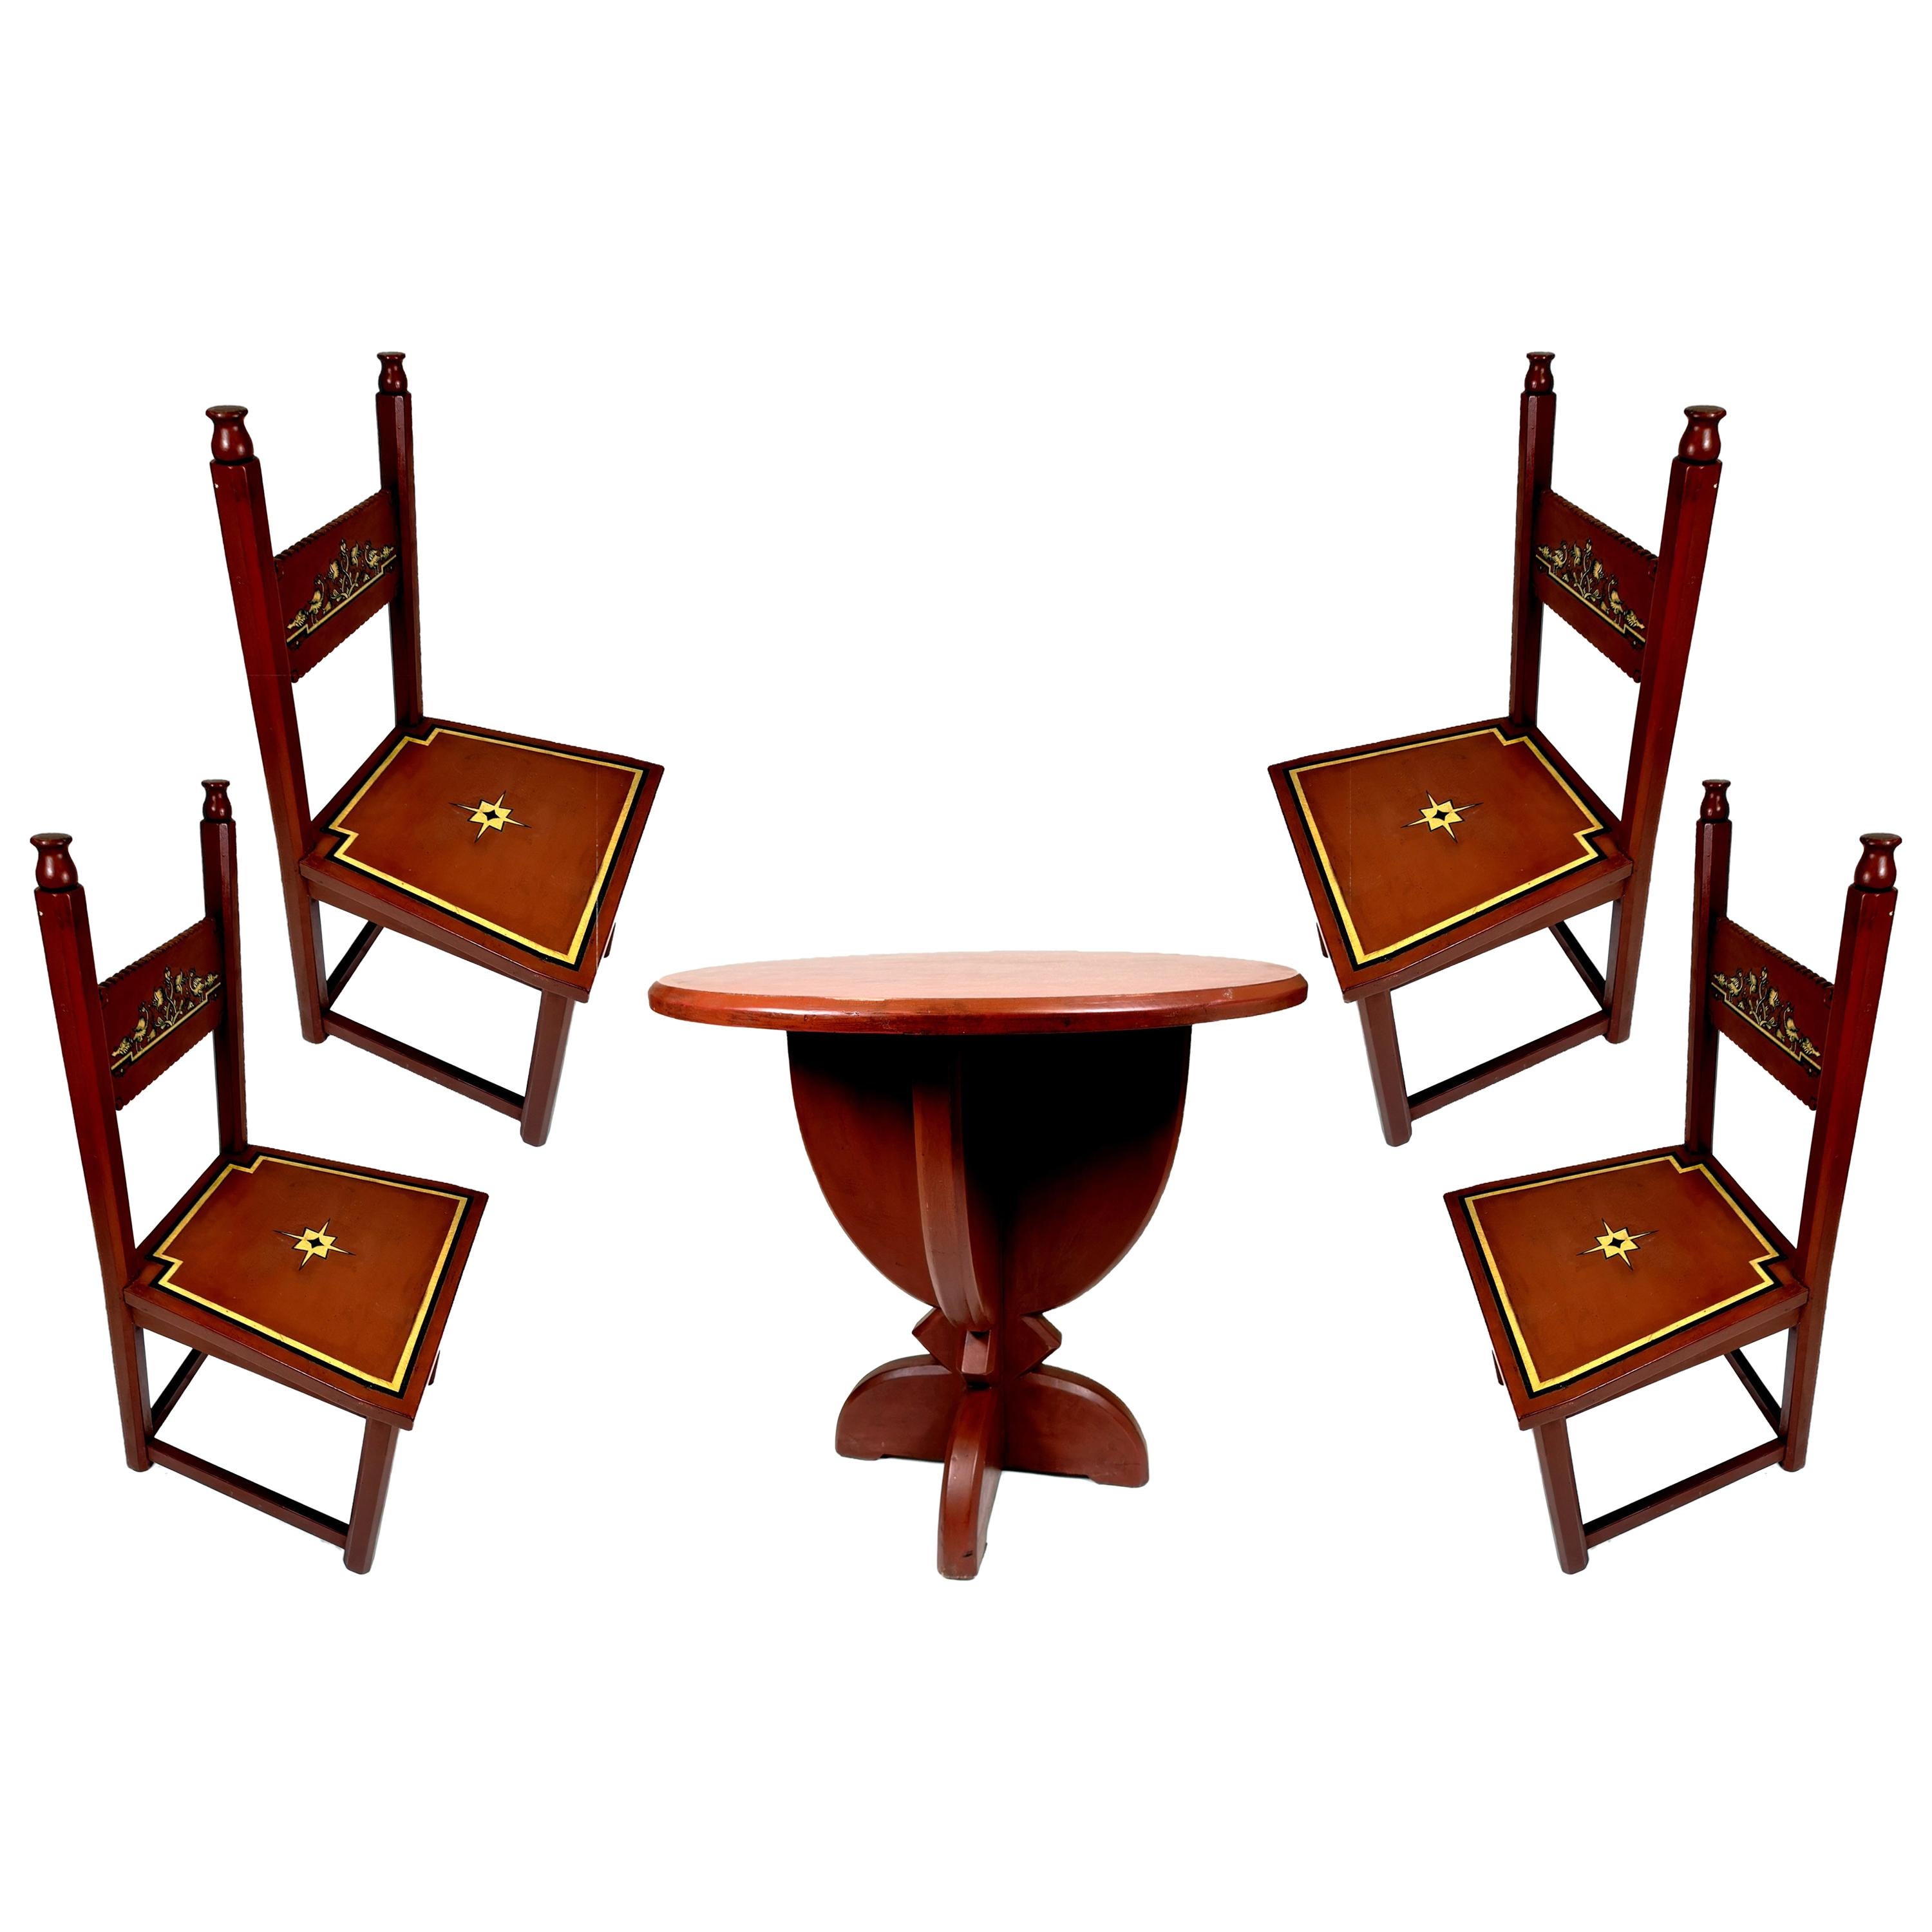 Hand Painted Art Deco Dining Set with Four Chairs, 1930s